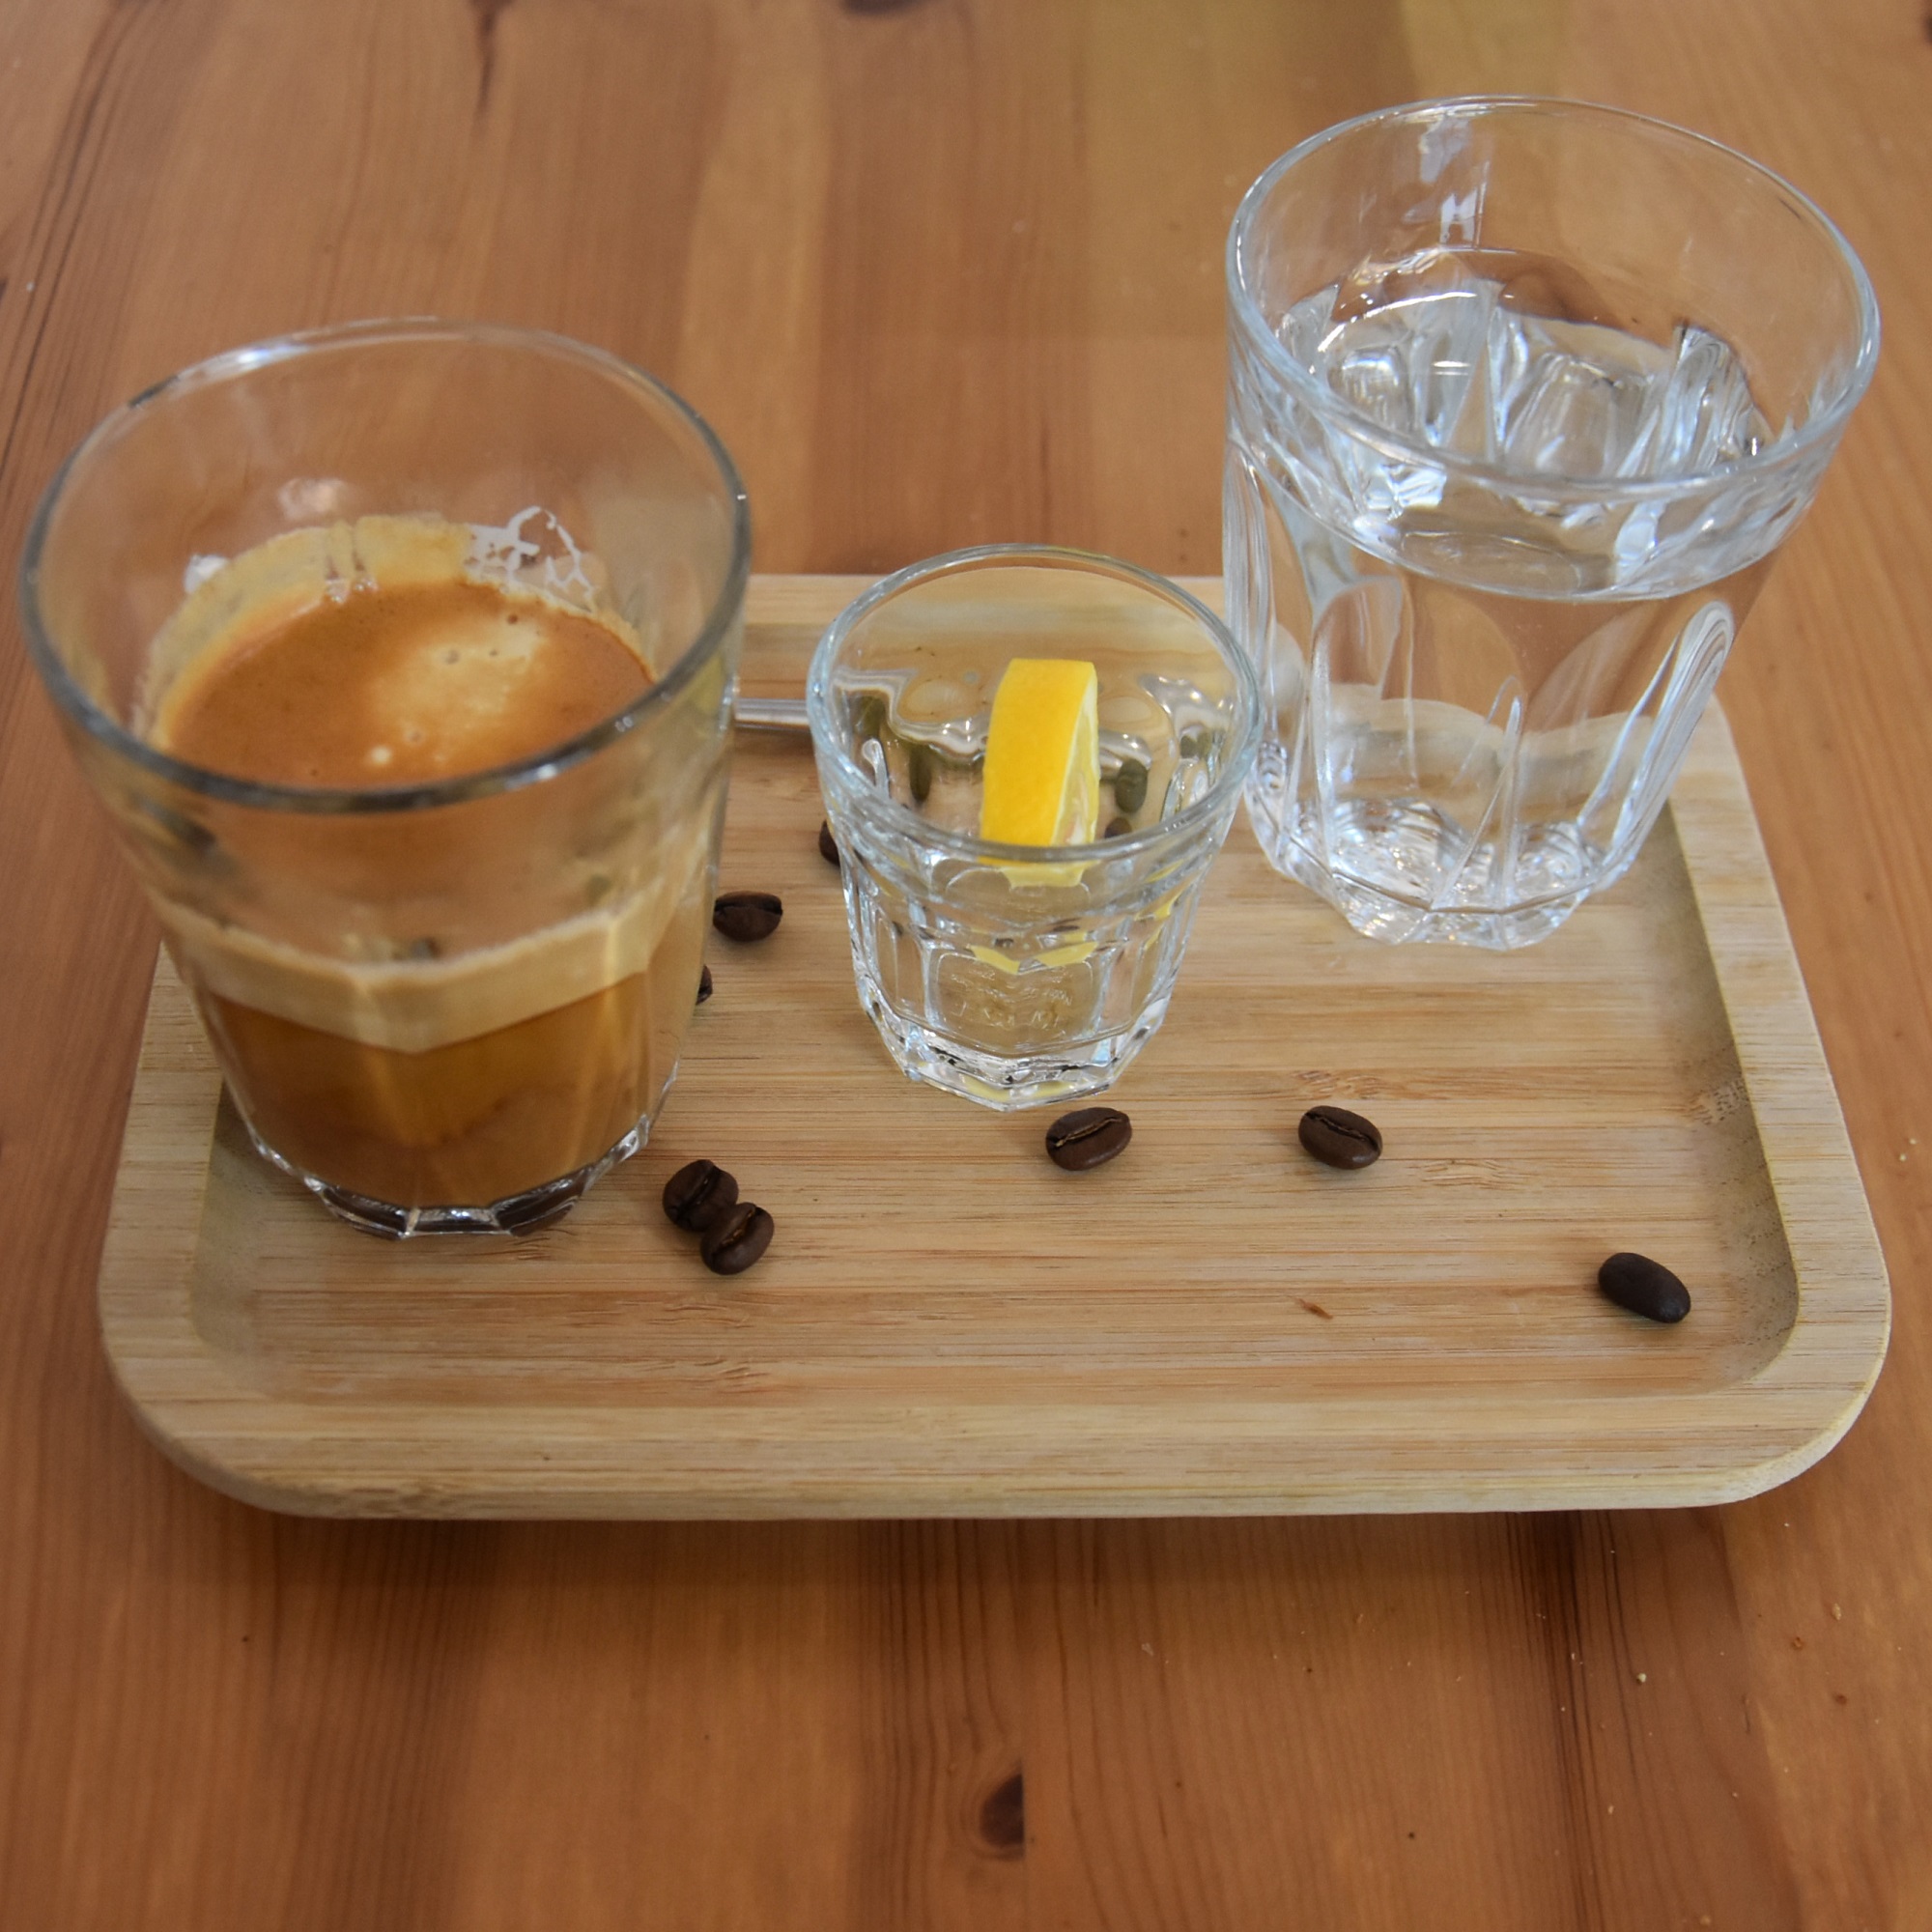 A commendably short cortado, served in a glass, and presented on a tray with a slice of orange and a glass of tap water.